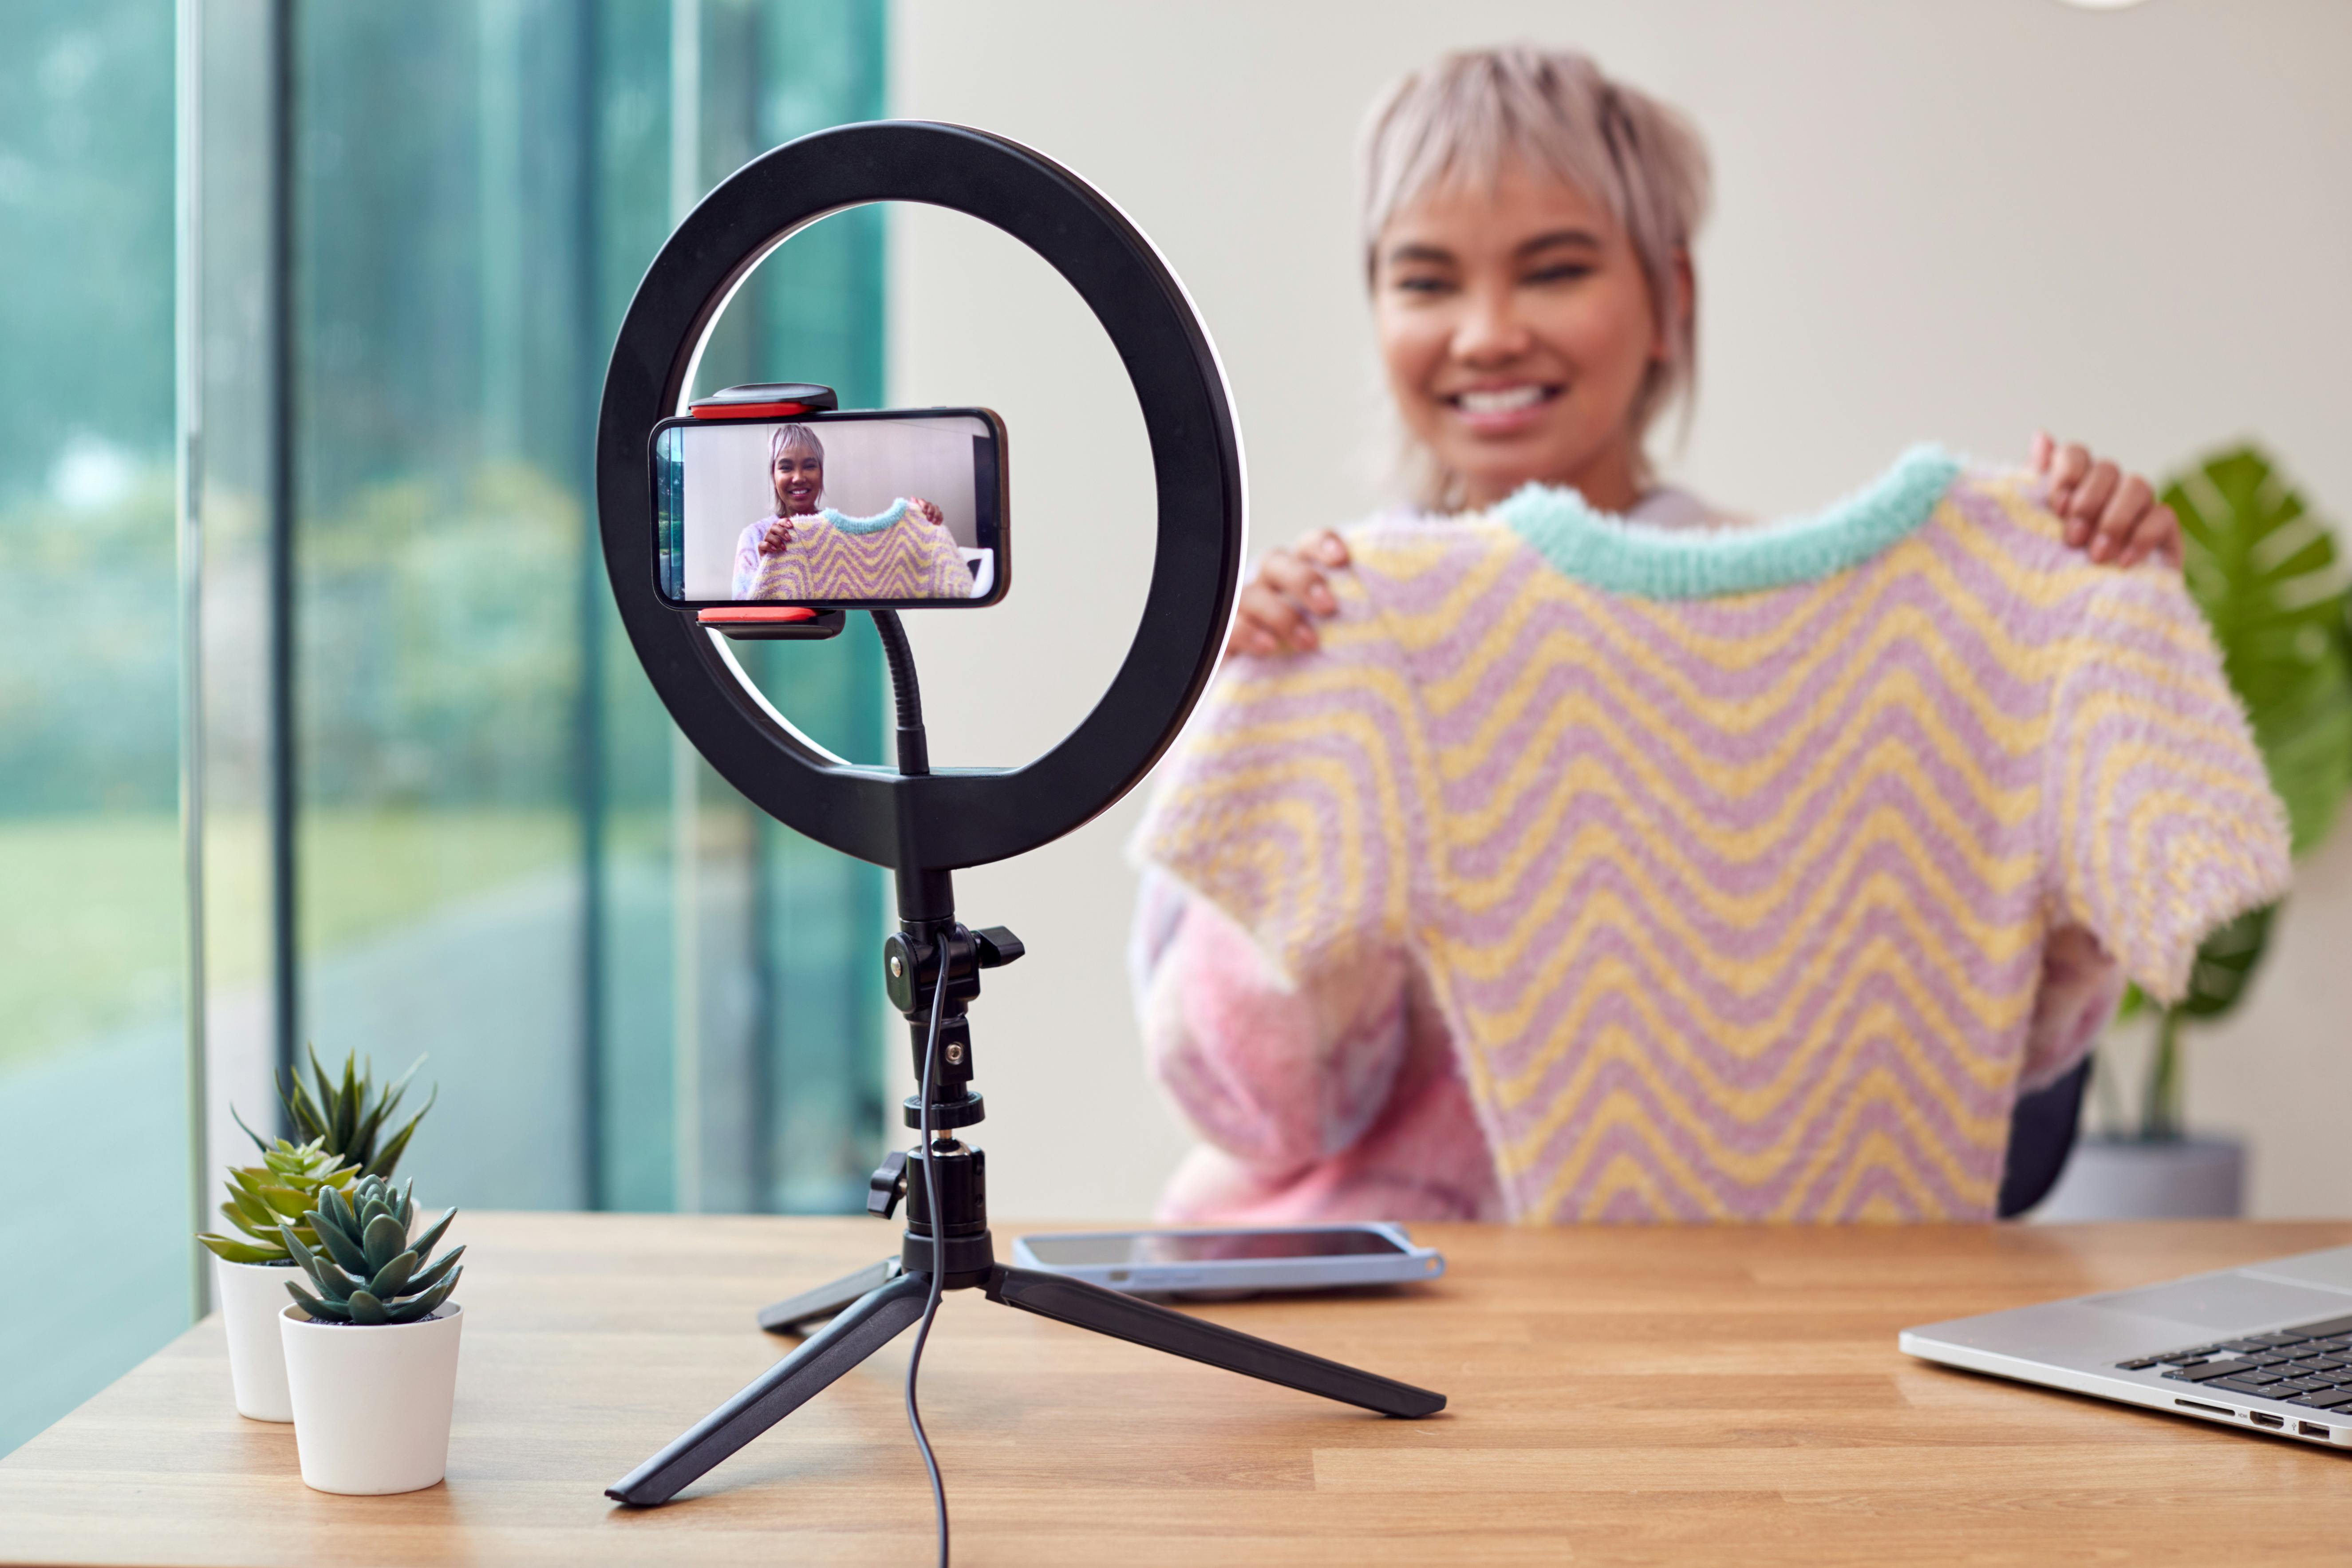  person recording themselves showing hand knitted top to camera